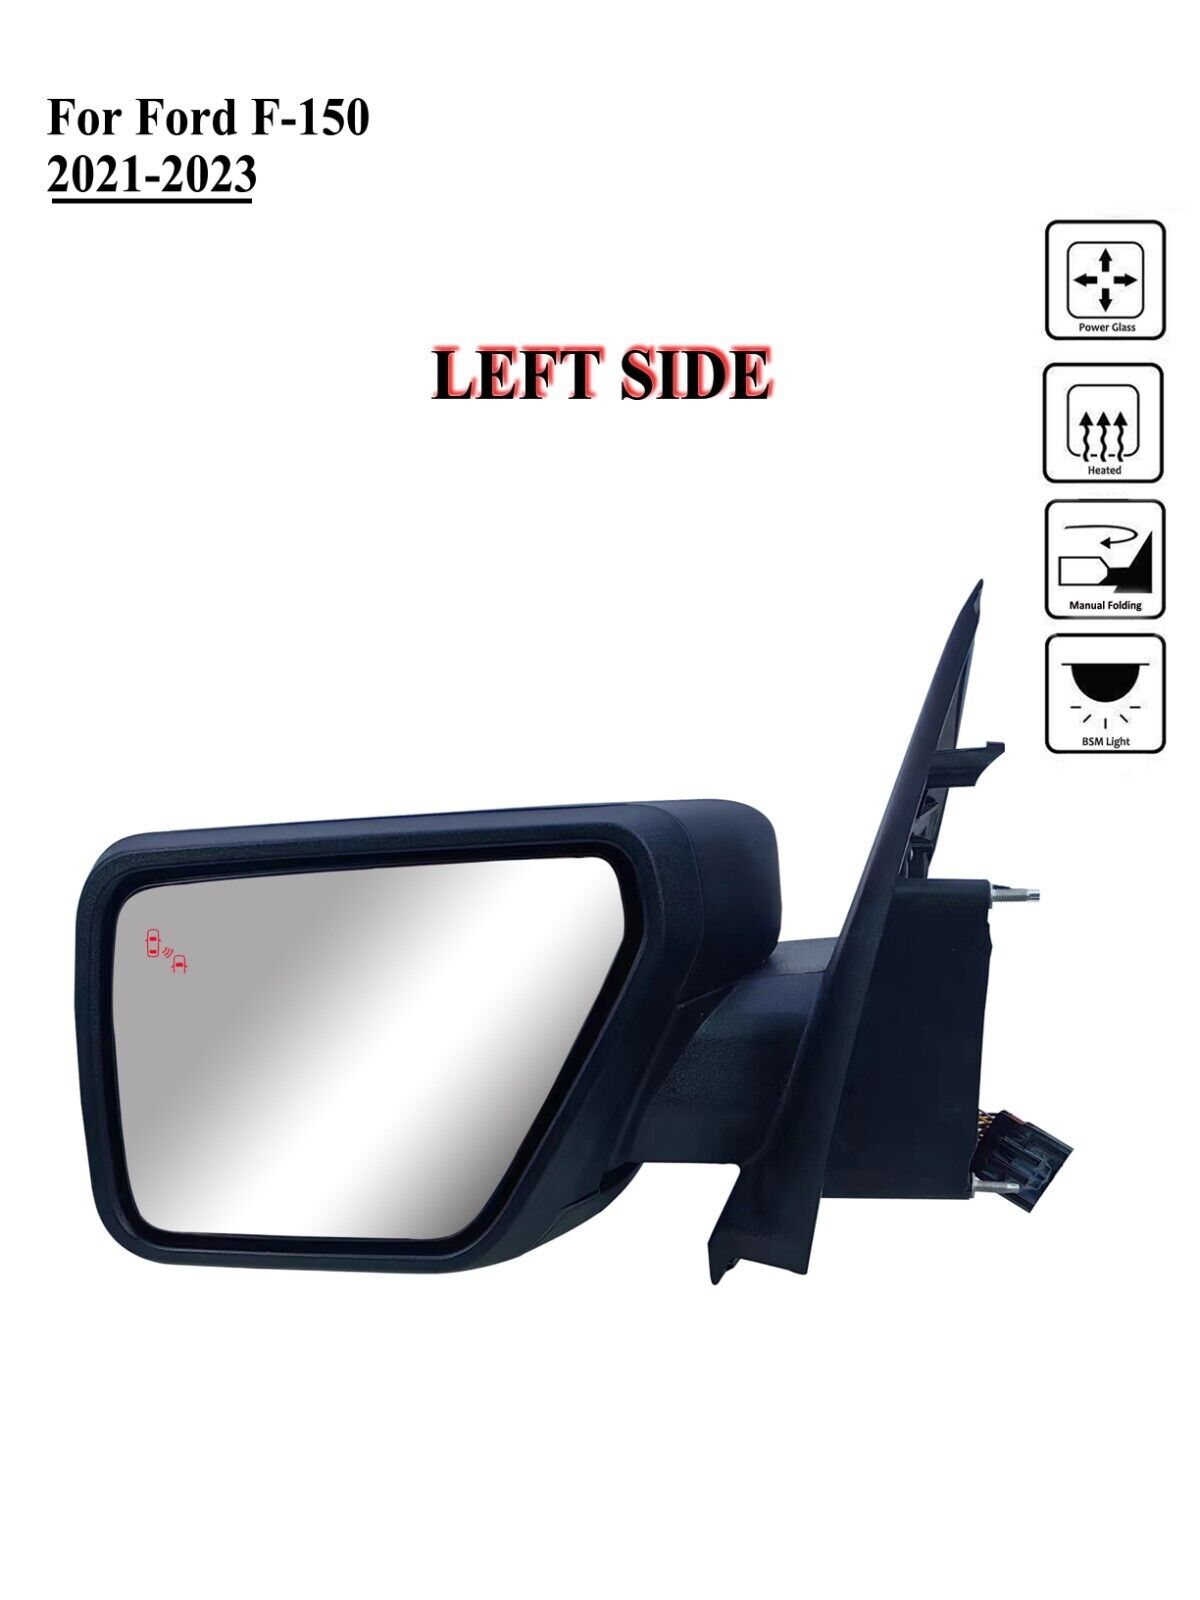 Driver Left Side Mirror Power Heat with BLIS Manual Fold for 21 to 24 Ford F-150